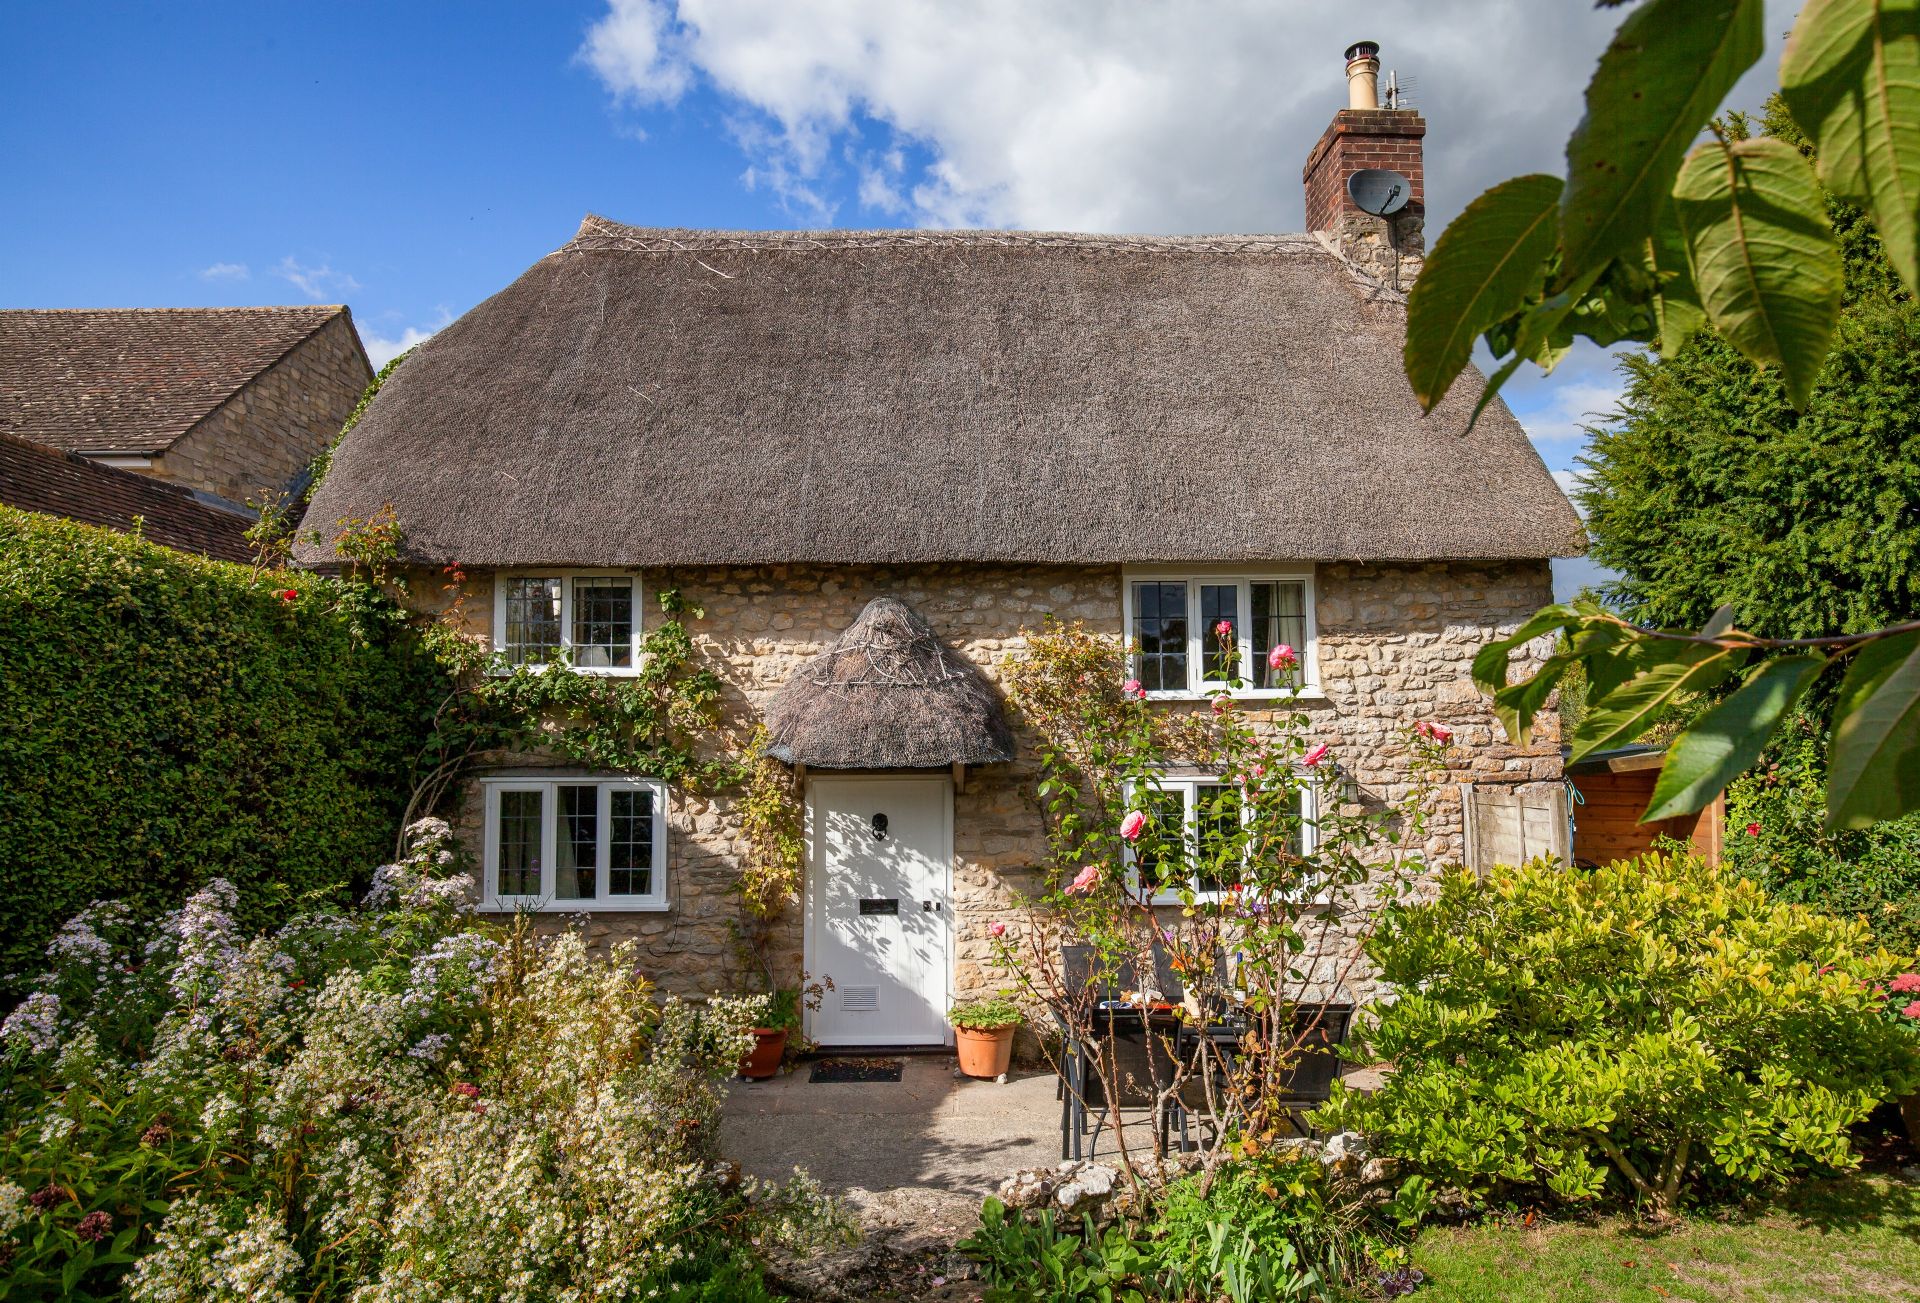 Snowdrop Cottage a holiday cottage rental for 4 in Sherborne and surrounding villages, 